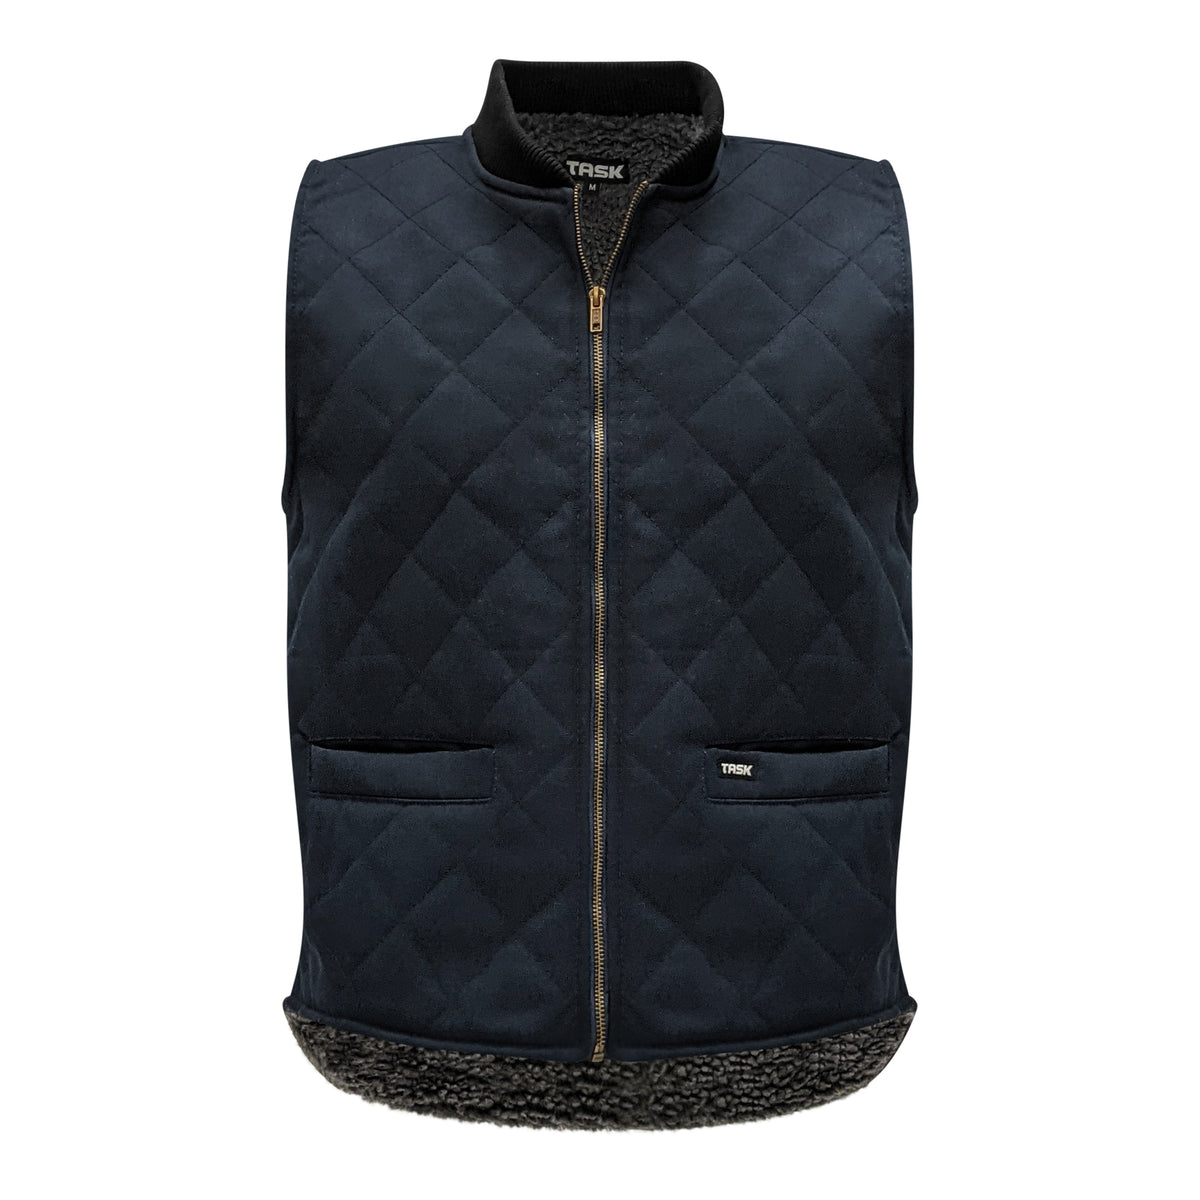 Men’s Work Vest with Sherpa Lining